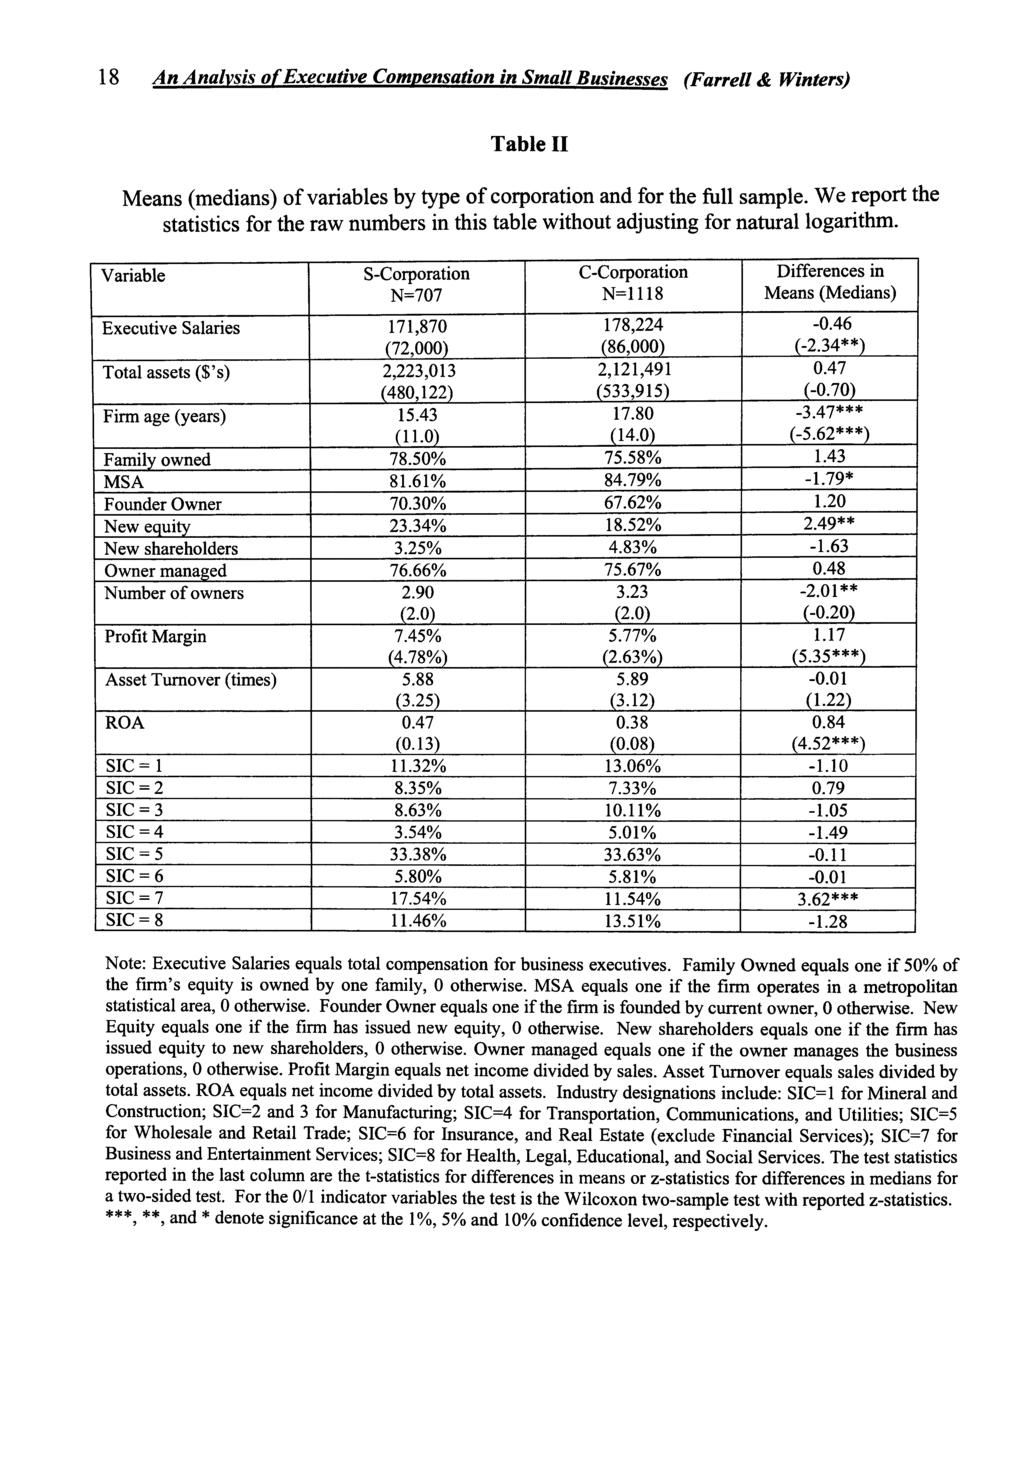 18 An Ana/vsis of Executive Compensation in Small Businesses (Farrell & Winters) Table II Means (medians) of variables by type of corporation and for the full sample.